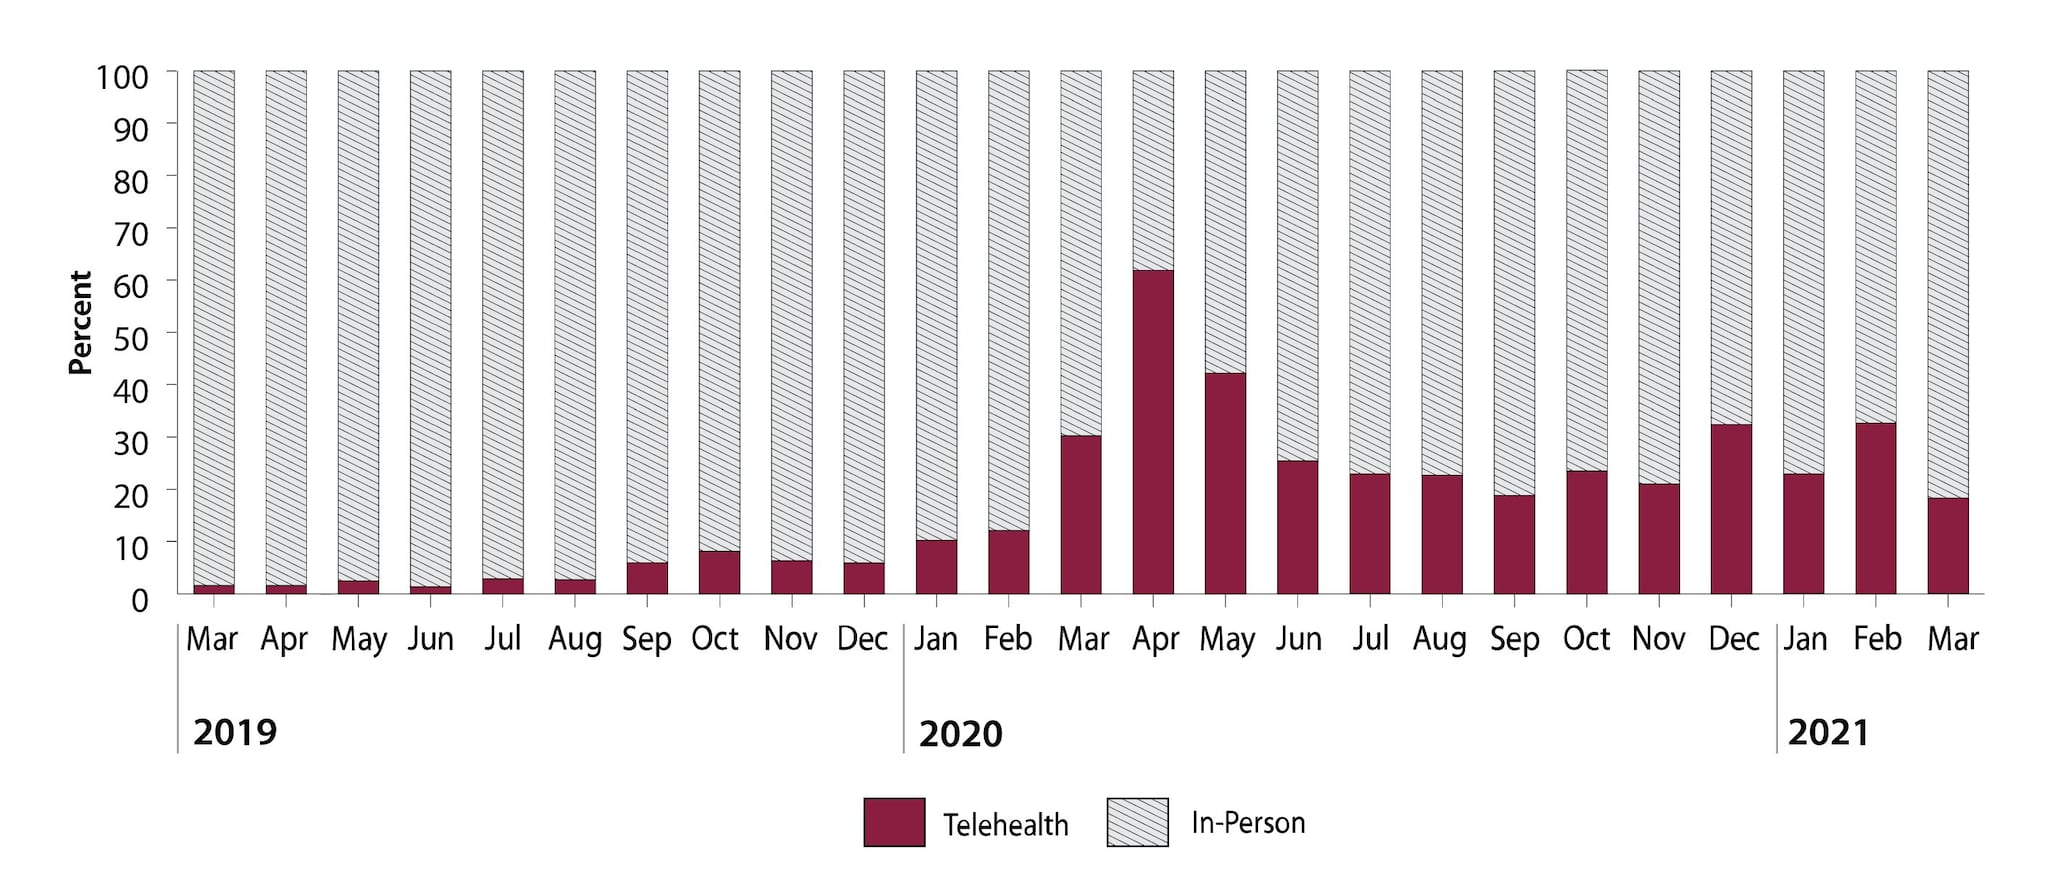 A bar graph showing the percentage of telehealth and in-person clinic encounters, by month, from March 2019 to March 2021